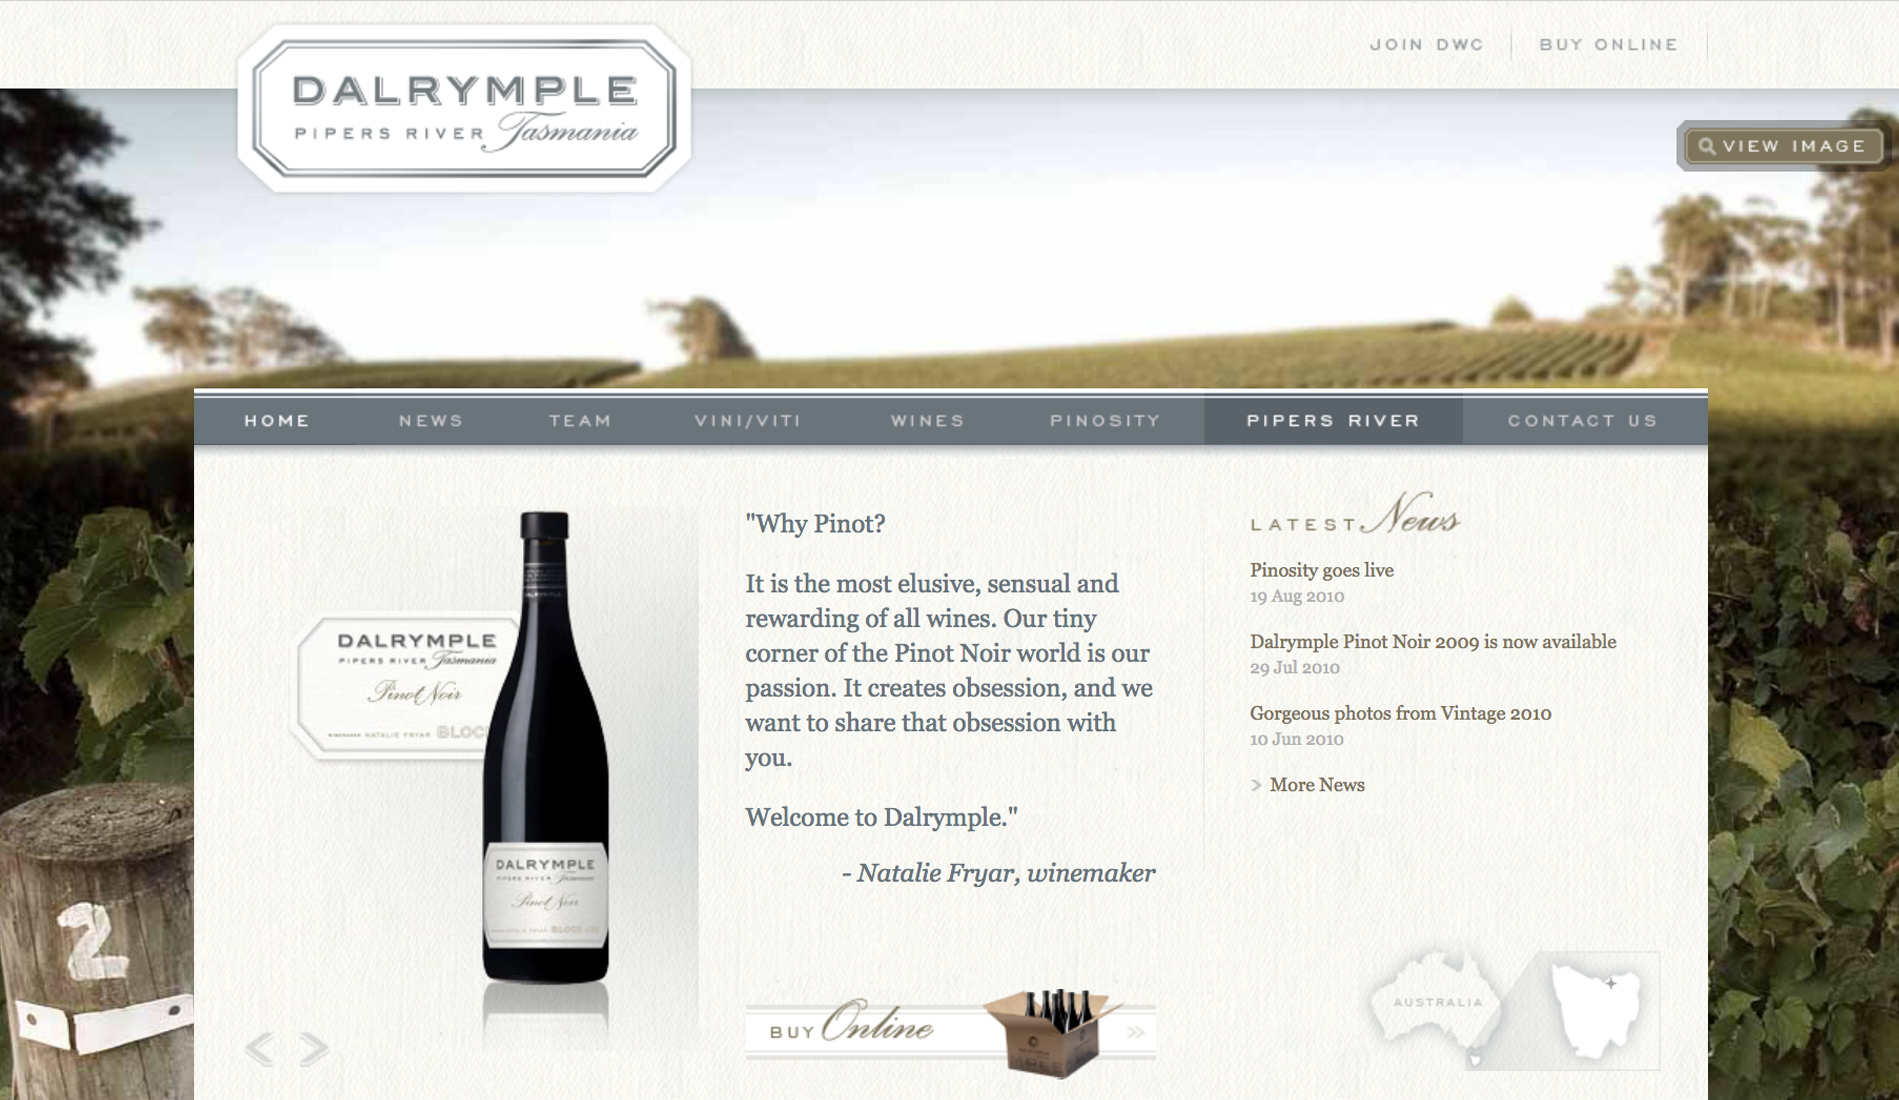 Dalrymple deliver beautiful wine through an elegant website